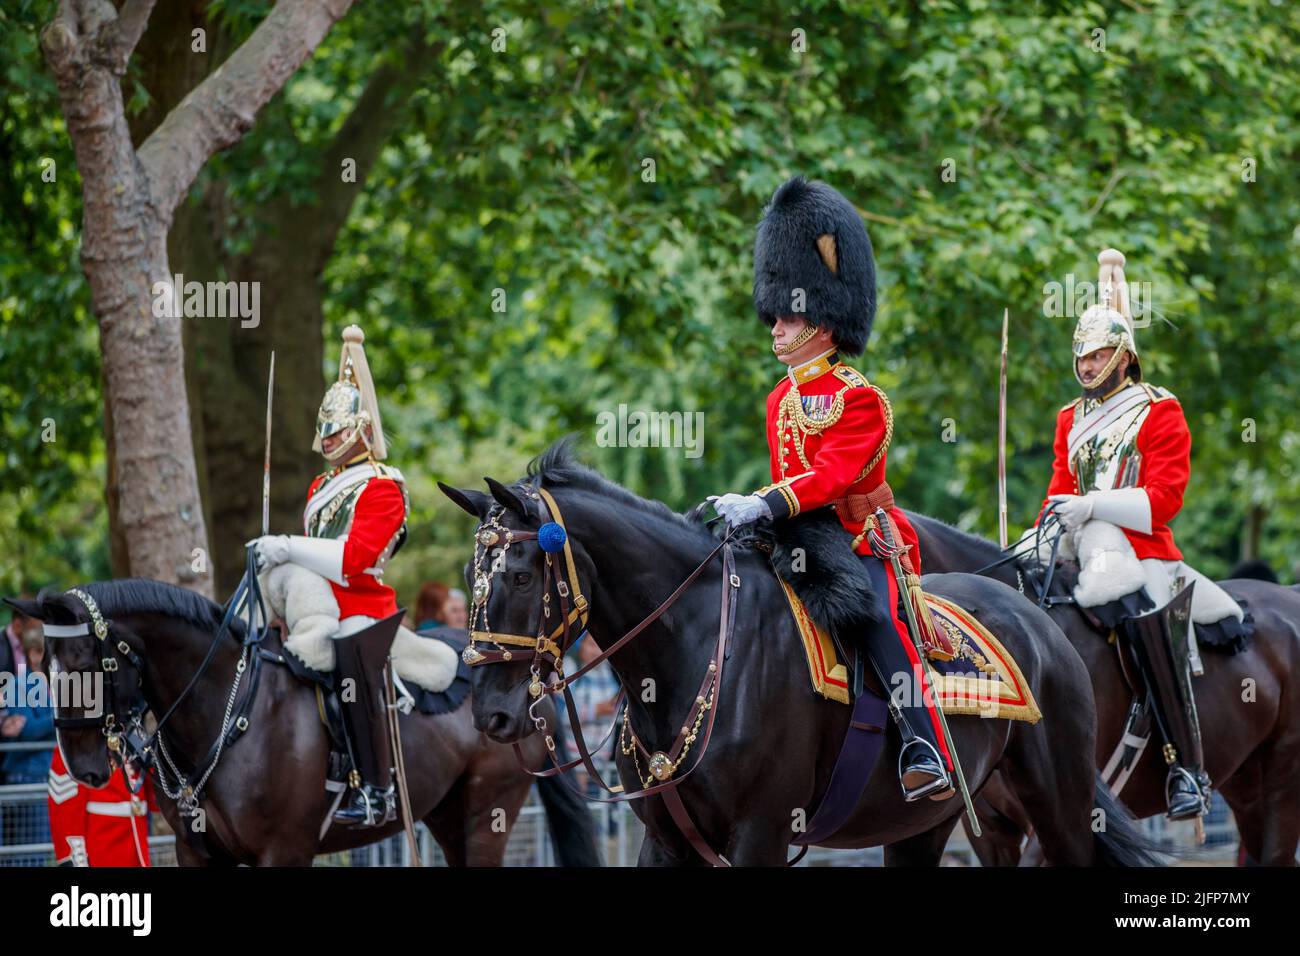 Oberstleutnant J Shaw bei Trooping the Color, Colonel’s Review in der Mall, London, England, Großbritannien, am Samstag, den 28. Mai 2022 Stockfoto